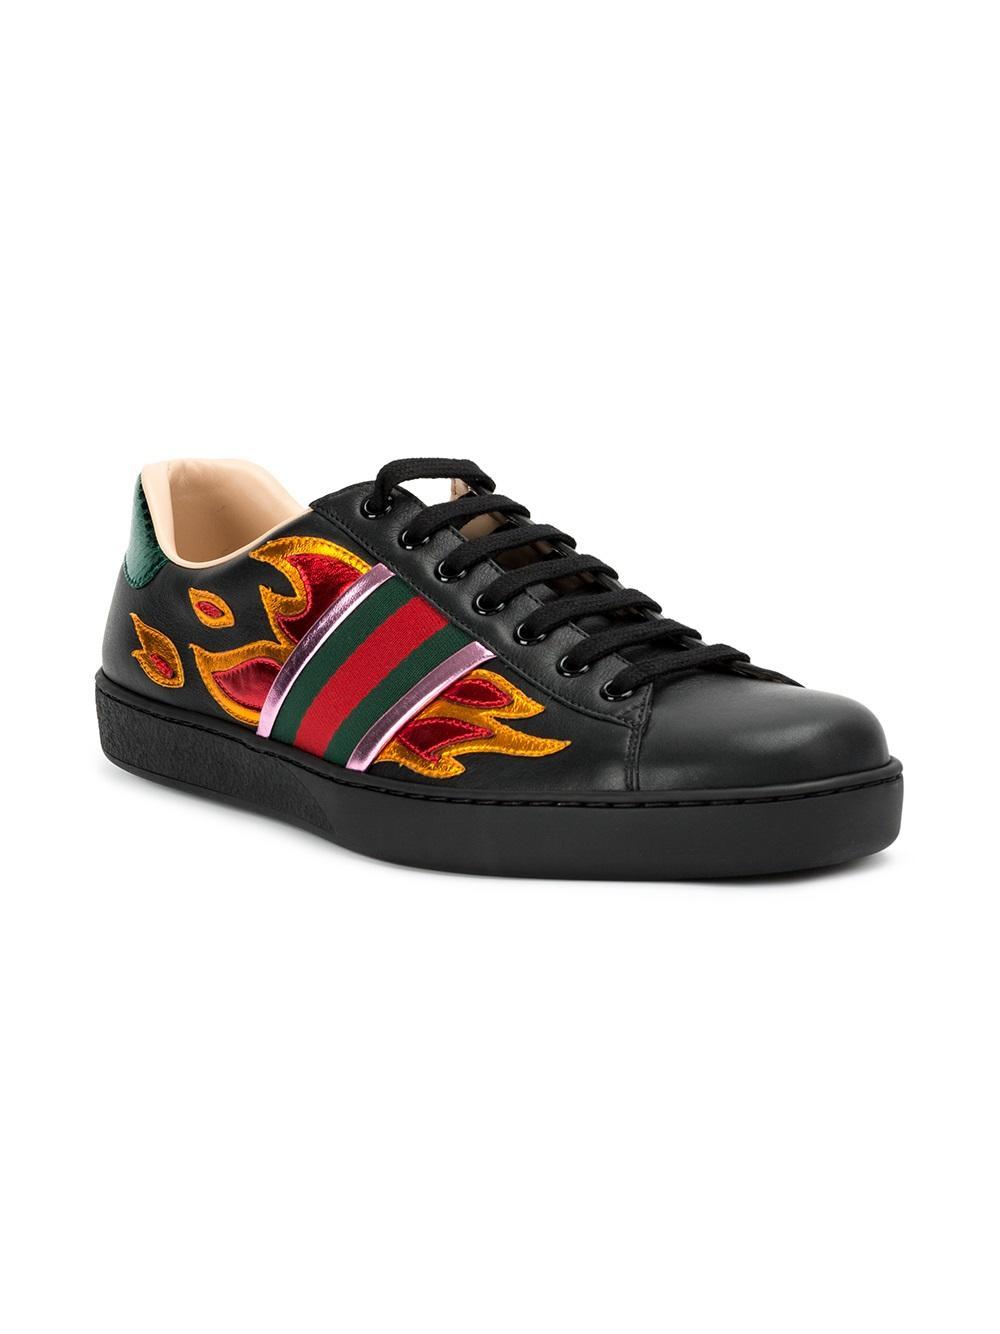 Gucci Leather Ace Flame Sneakers in Black for Men - Lyst